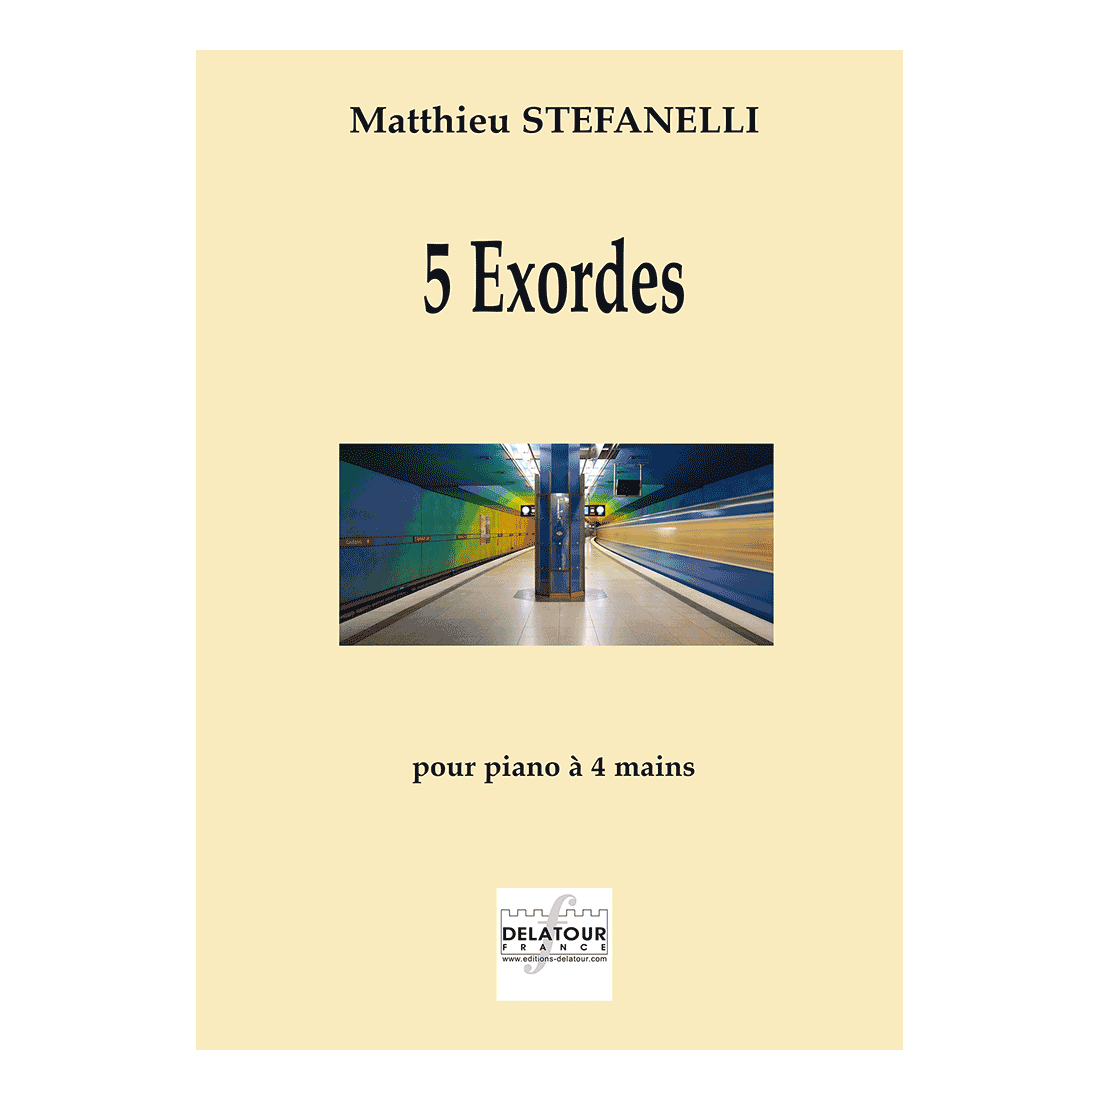 5 exordes for piano 4 hands